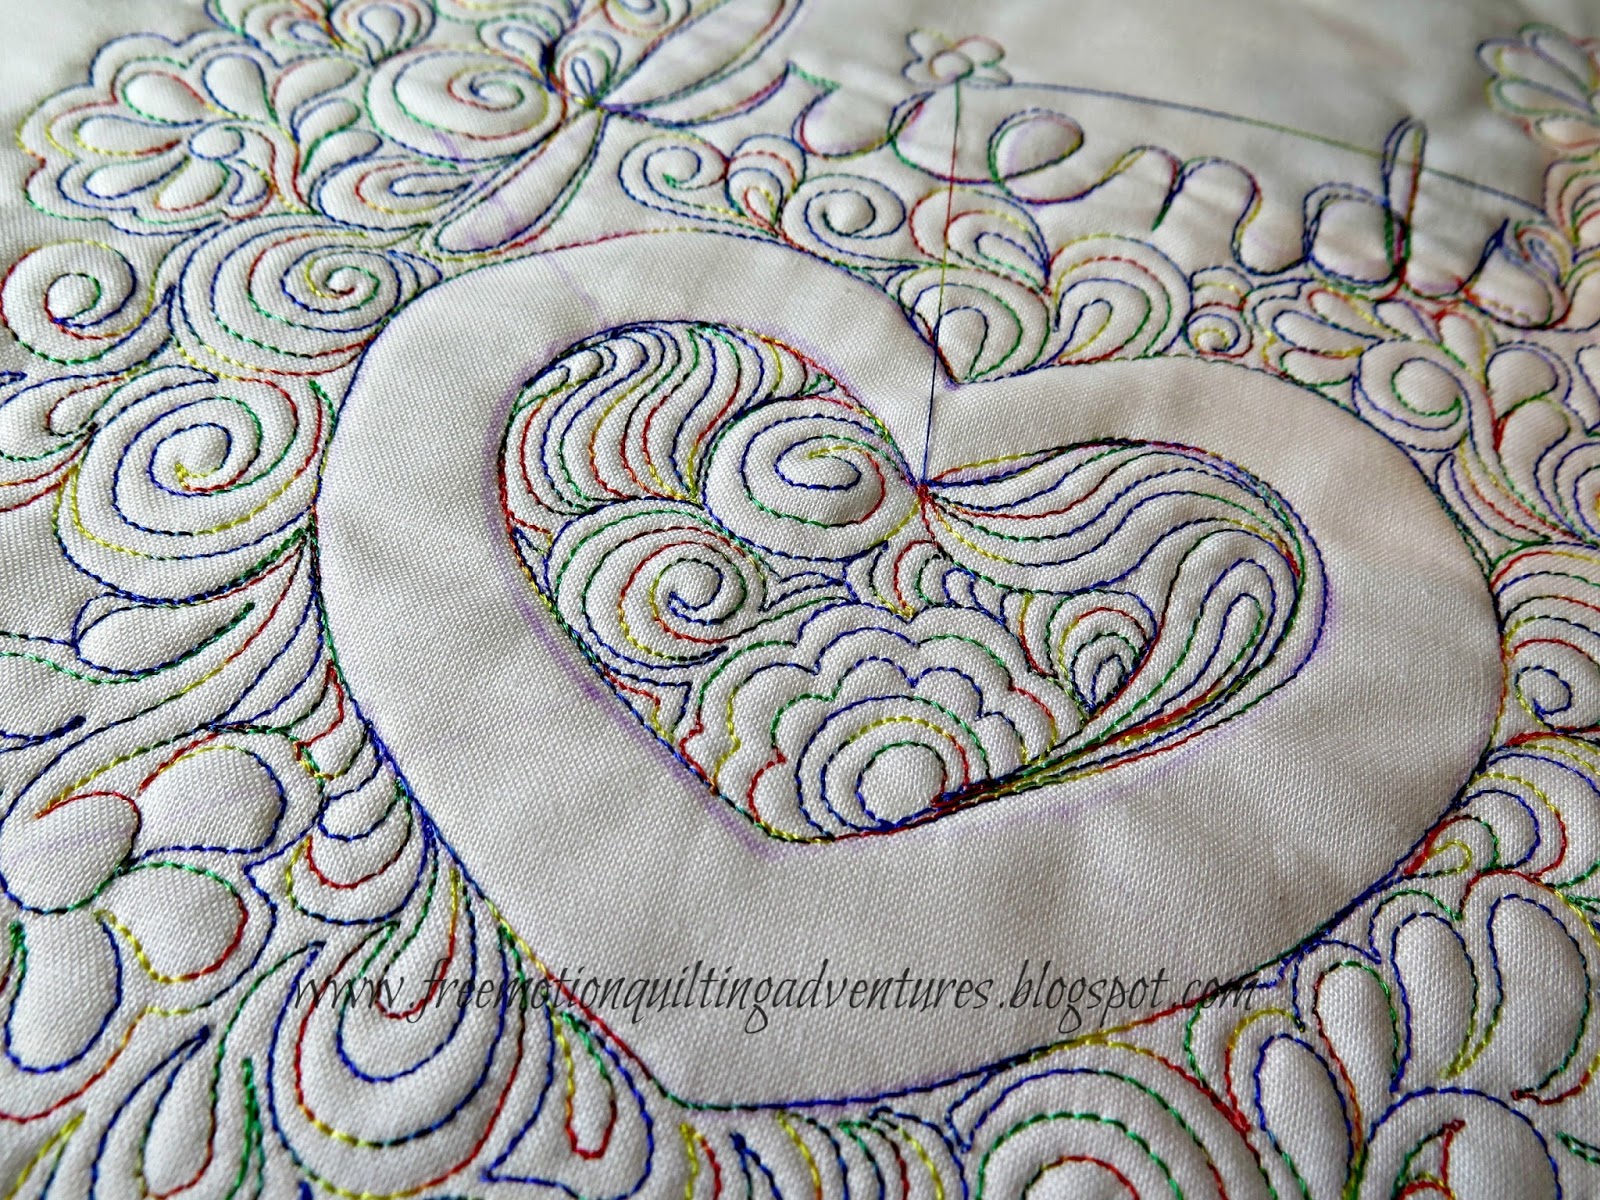 Heart free motion quilted